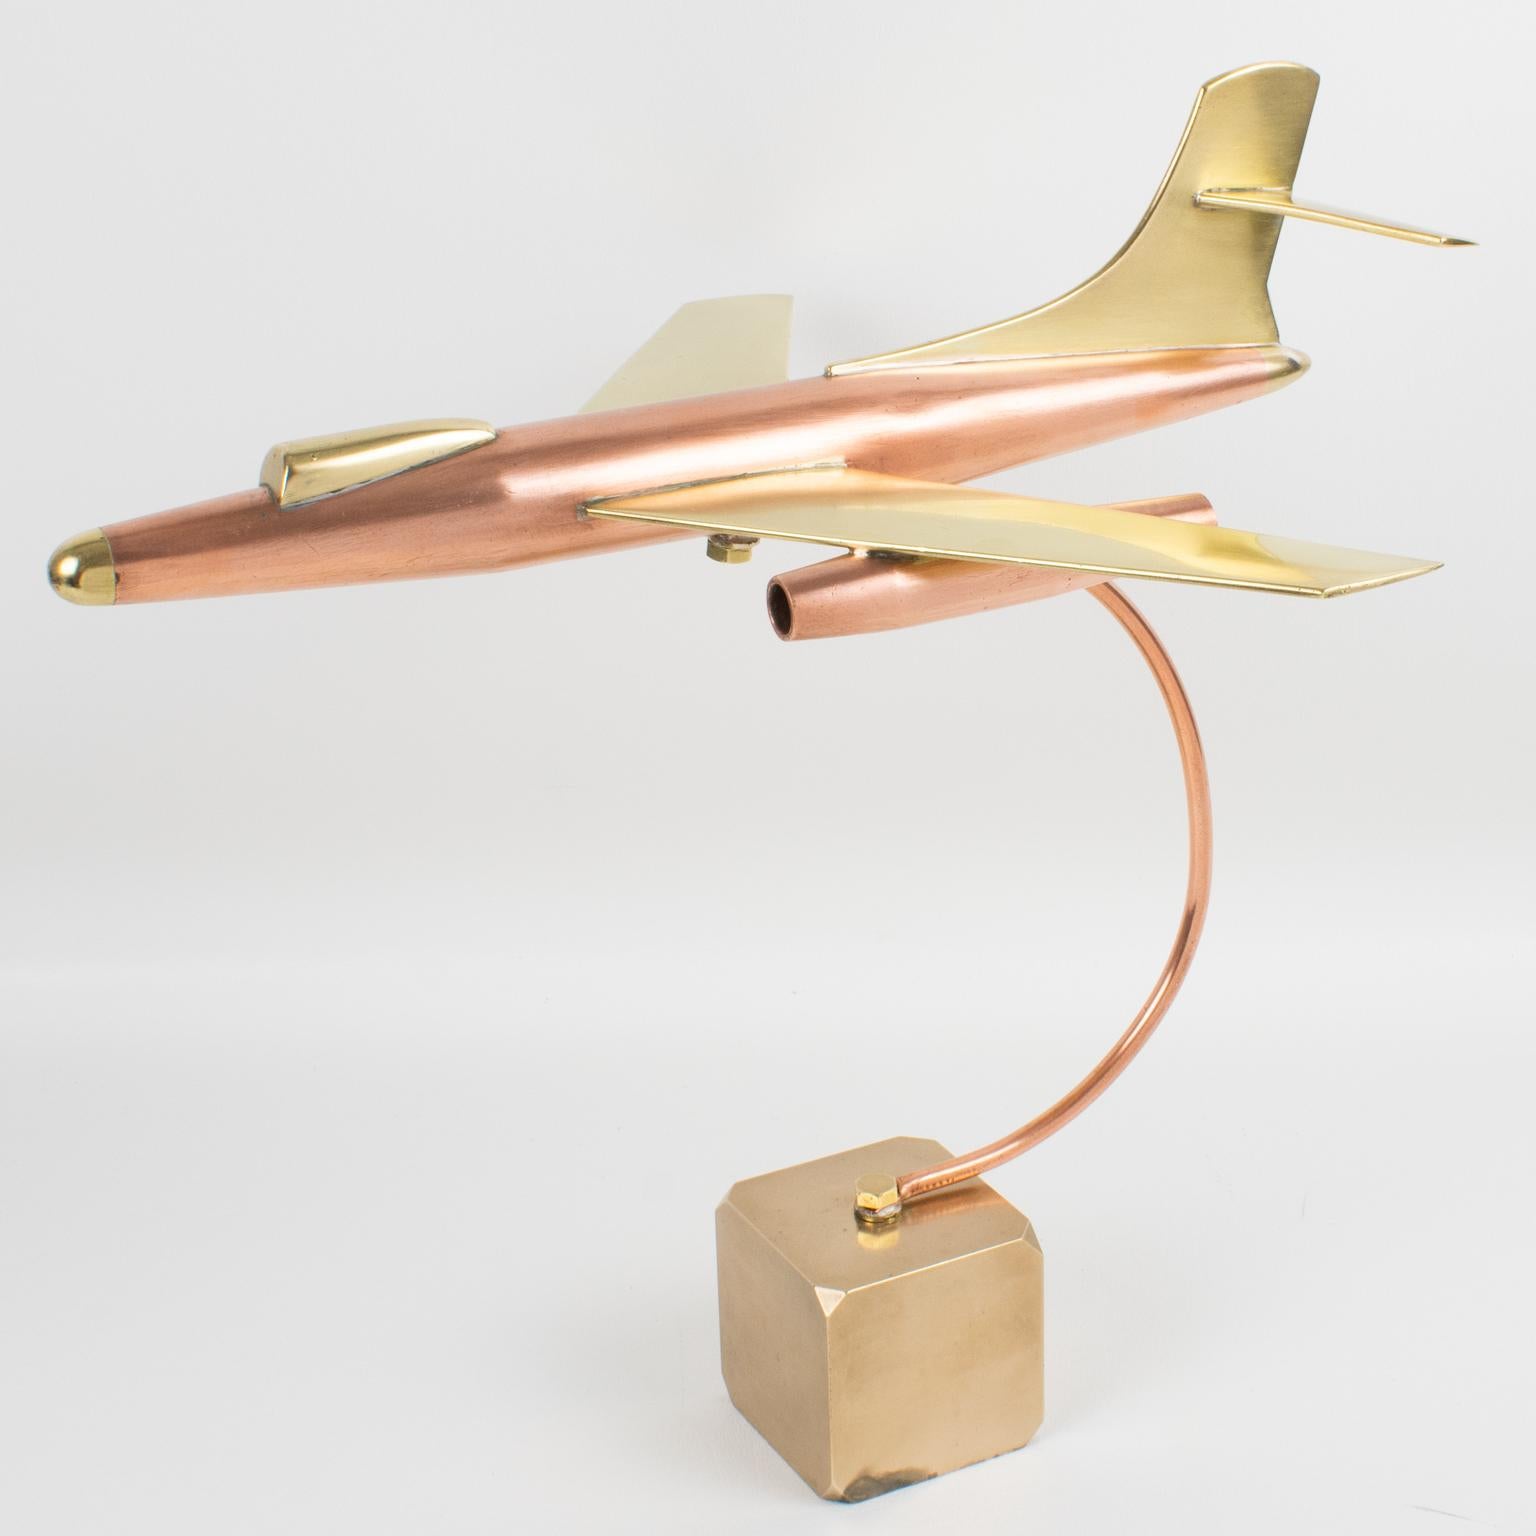 This is a stunning large brass and copper airplane model made in France circa 1960. It features an impressive all-metal jet plane model on a thick, solid brass cube base and is a great desk accessory for aviation collectors and lovers. There is no